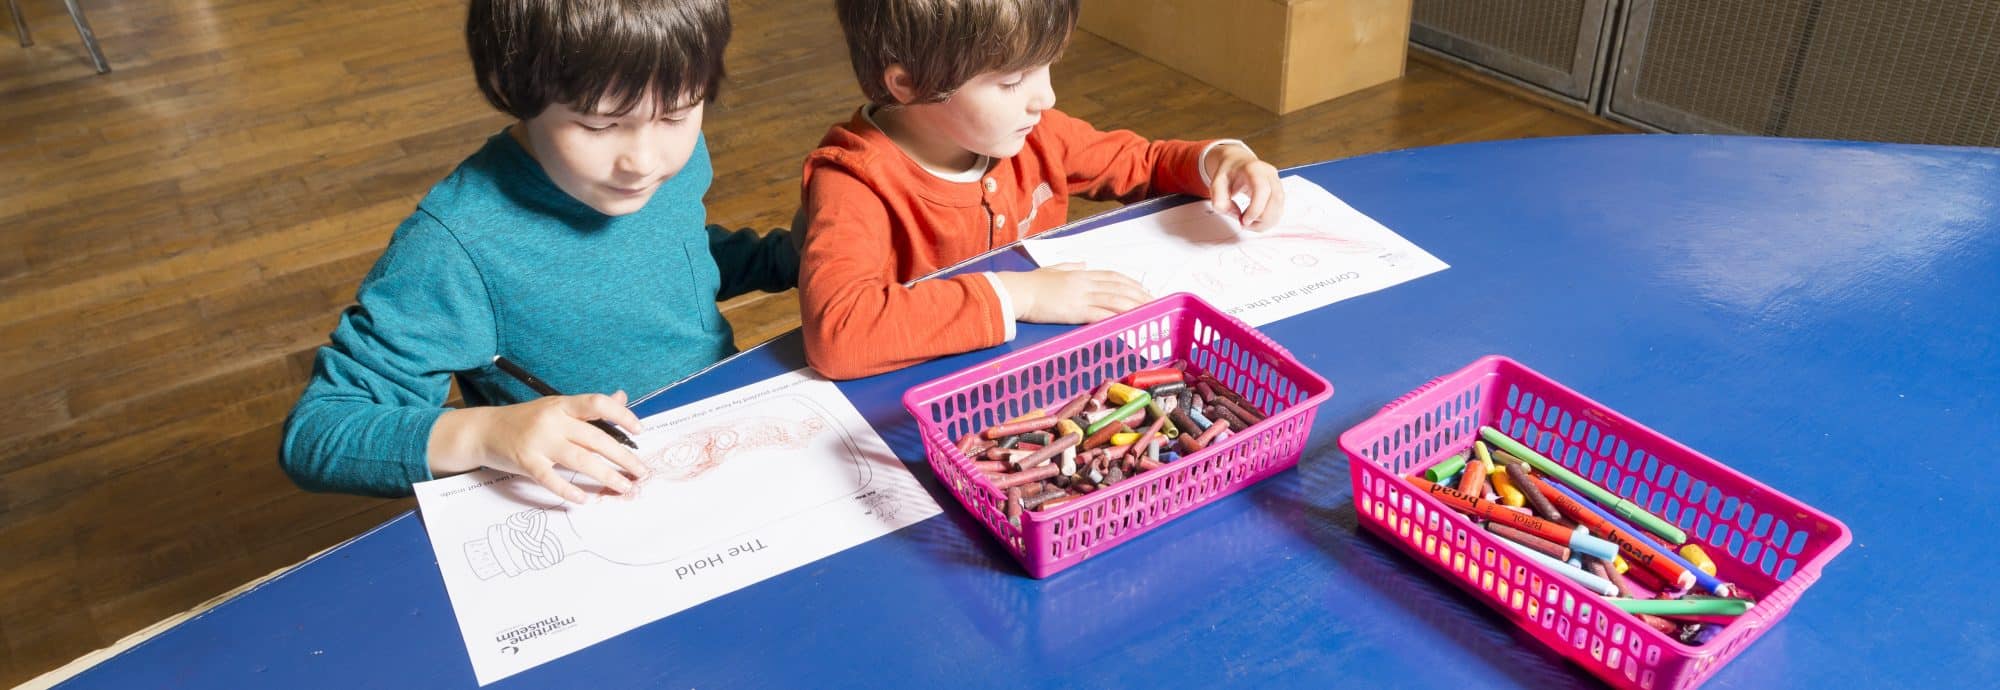 A photo of two young boys drawing as part of craft activities at the Museum. Two boxes of pens and crayons are in front of them on the blue table.